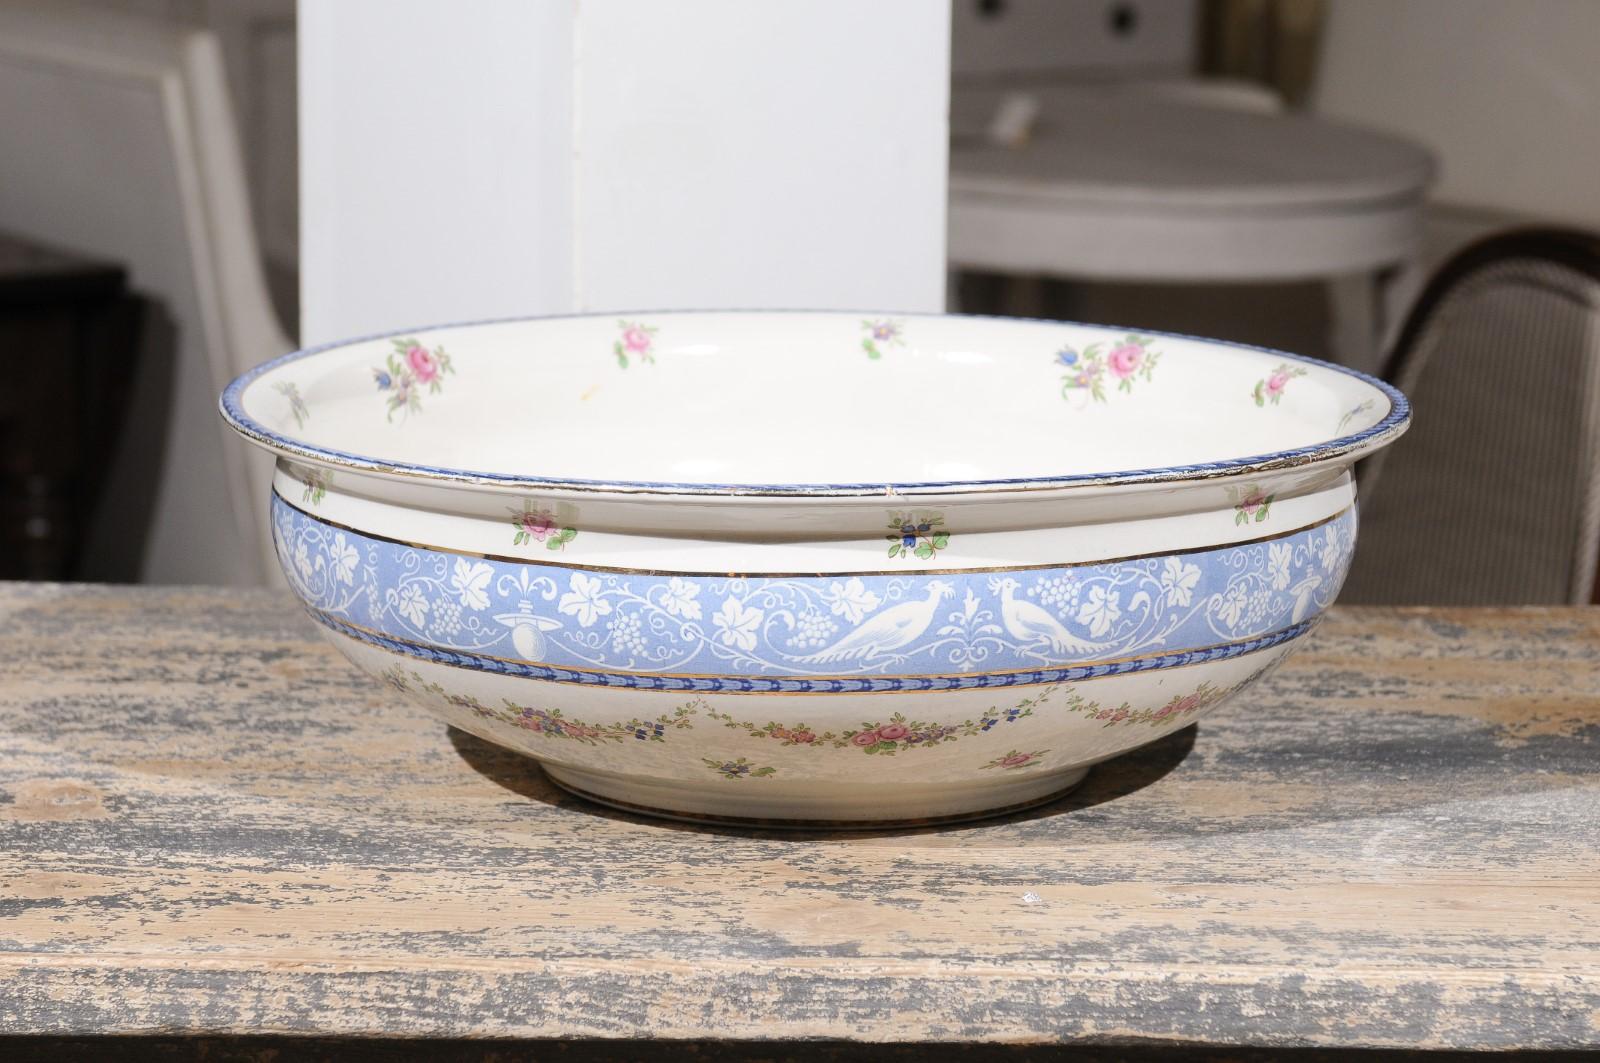 An English Booth's silicon China Cameo pattern bowl from the early 20th century, with pink roses and blue and white pheasants. Born in England during the early years of the 20th century, this exquisite bowl features a charming décor made of delicate